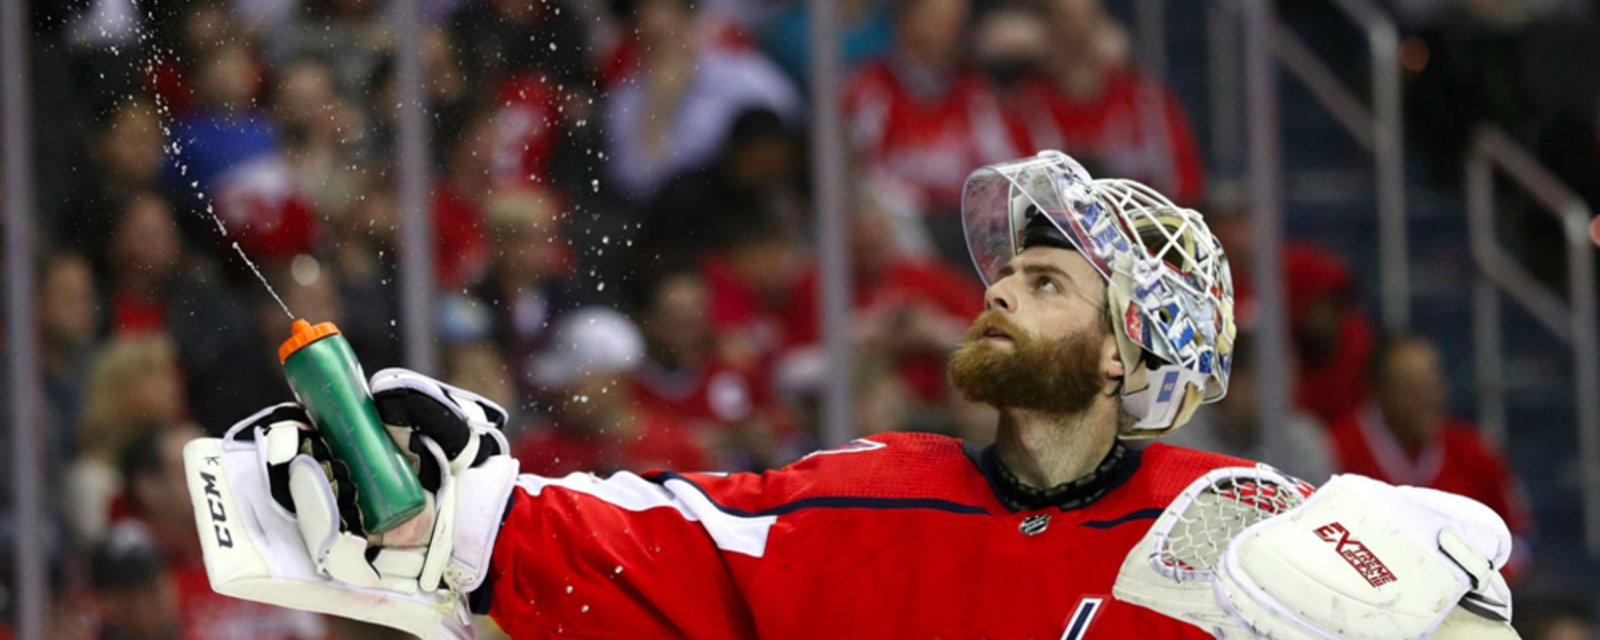 Capitals GM confirms Braden Holtby will not be back